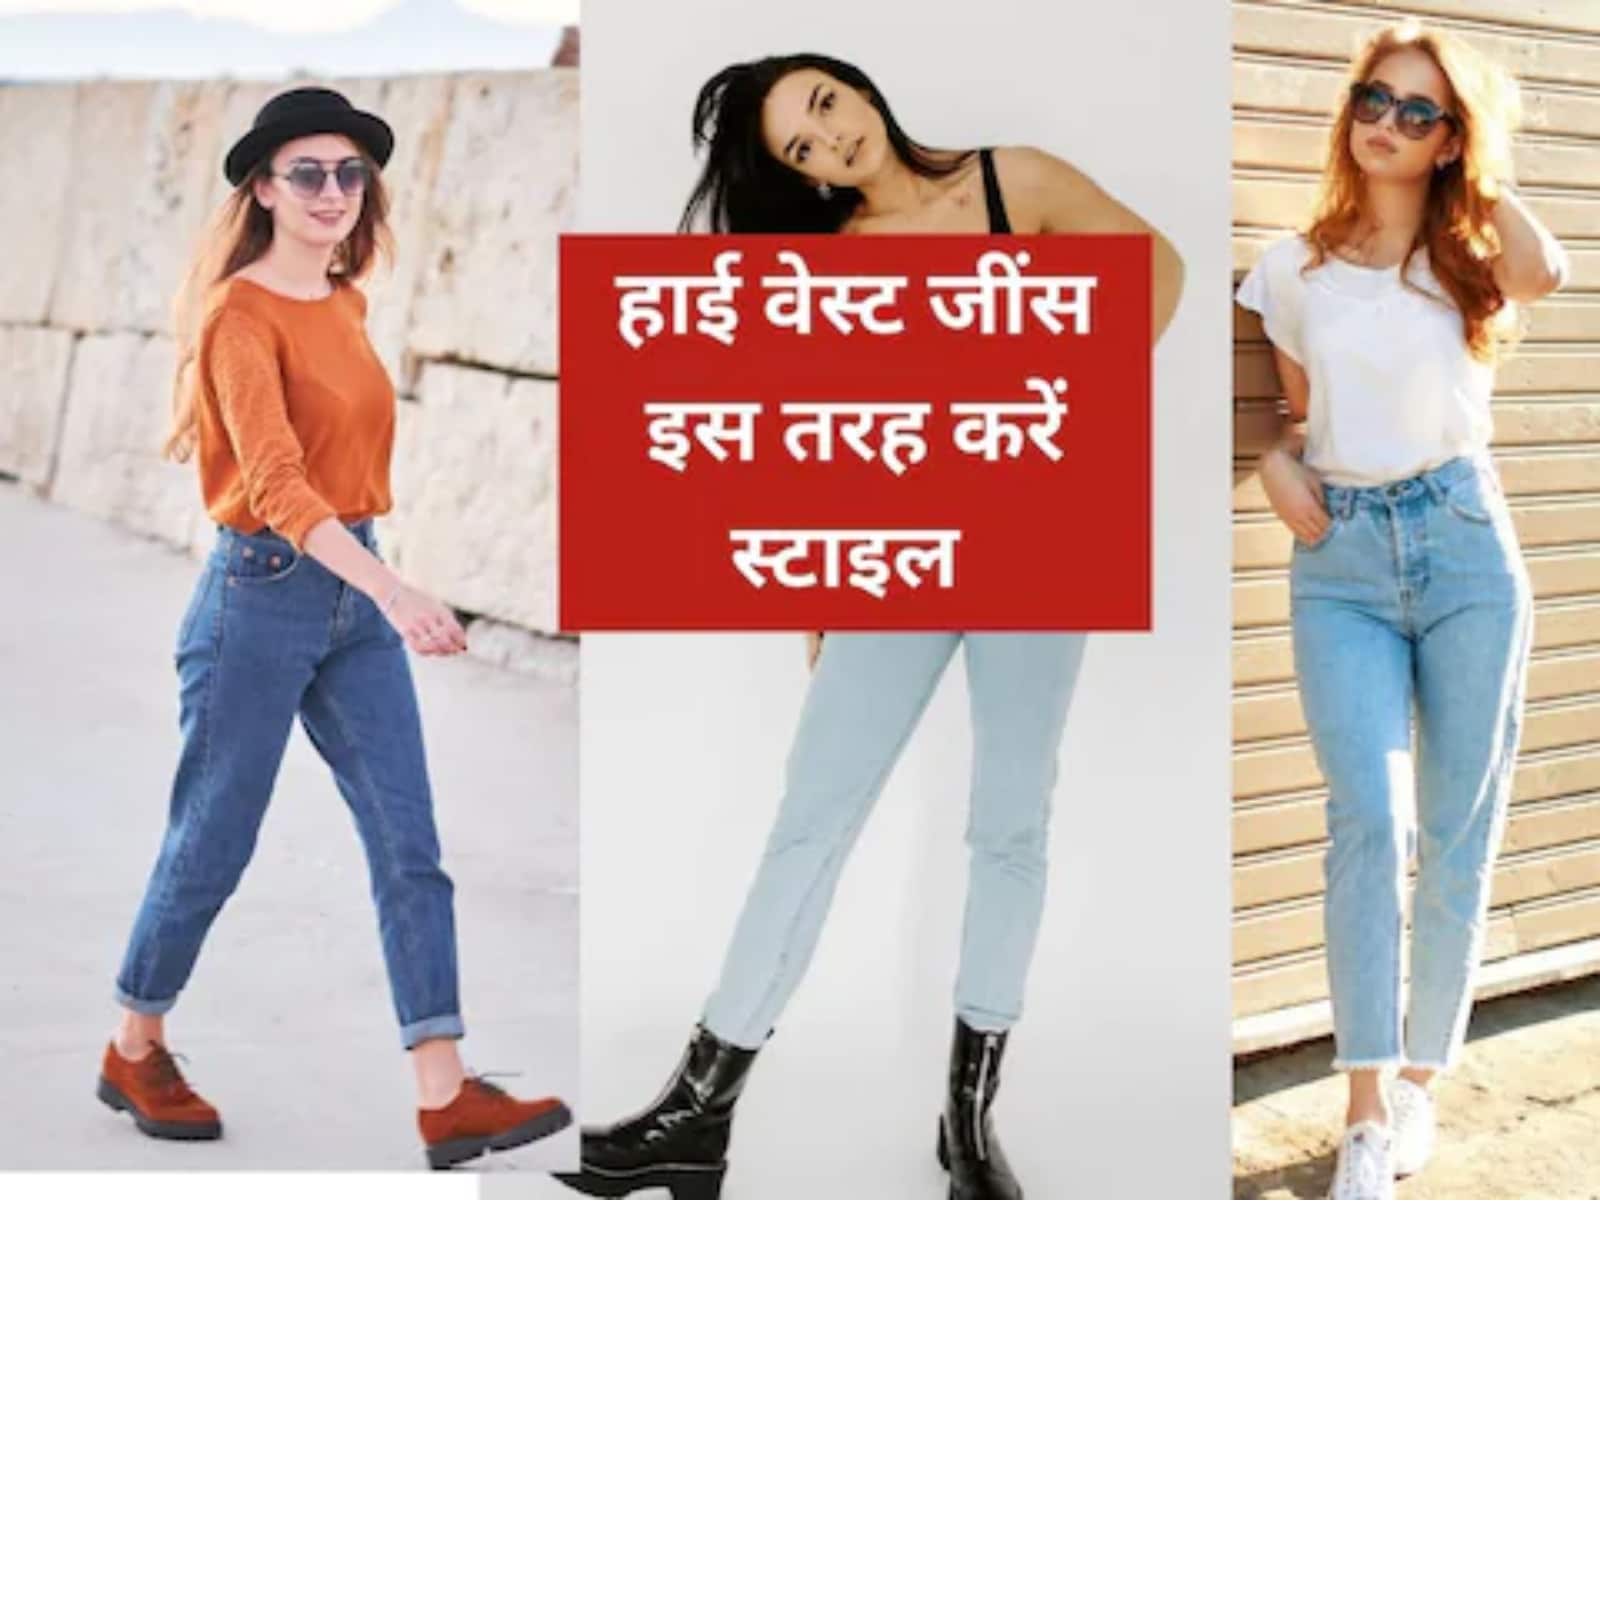 From Crop Top to Kurti, 5 Amazing Ways To Style High Waist Jeans